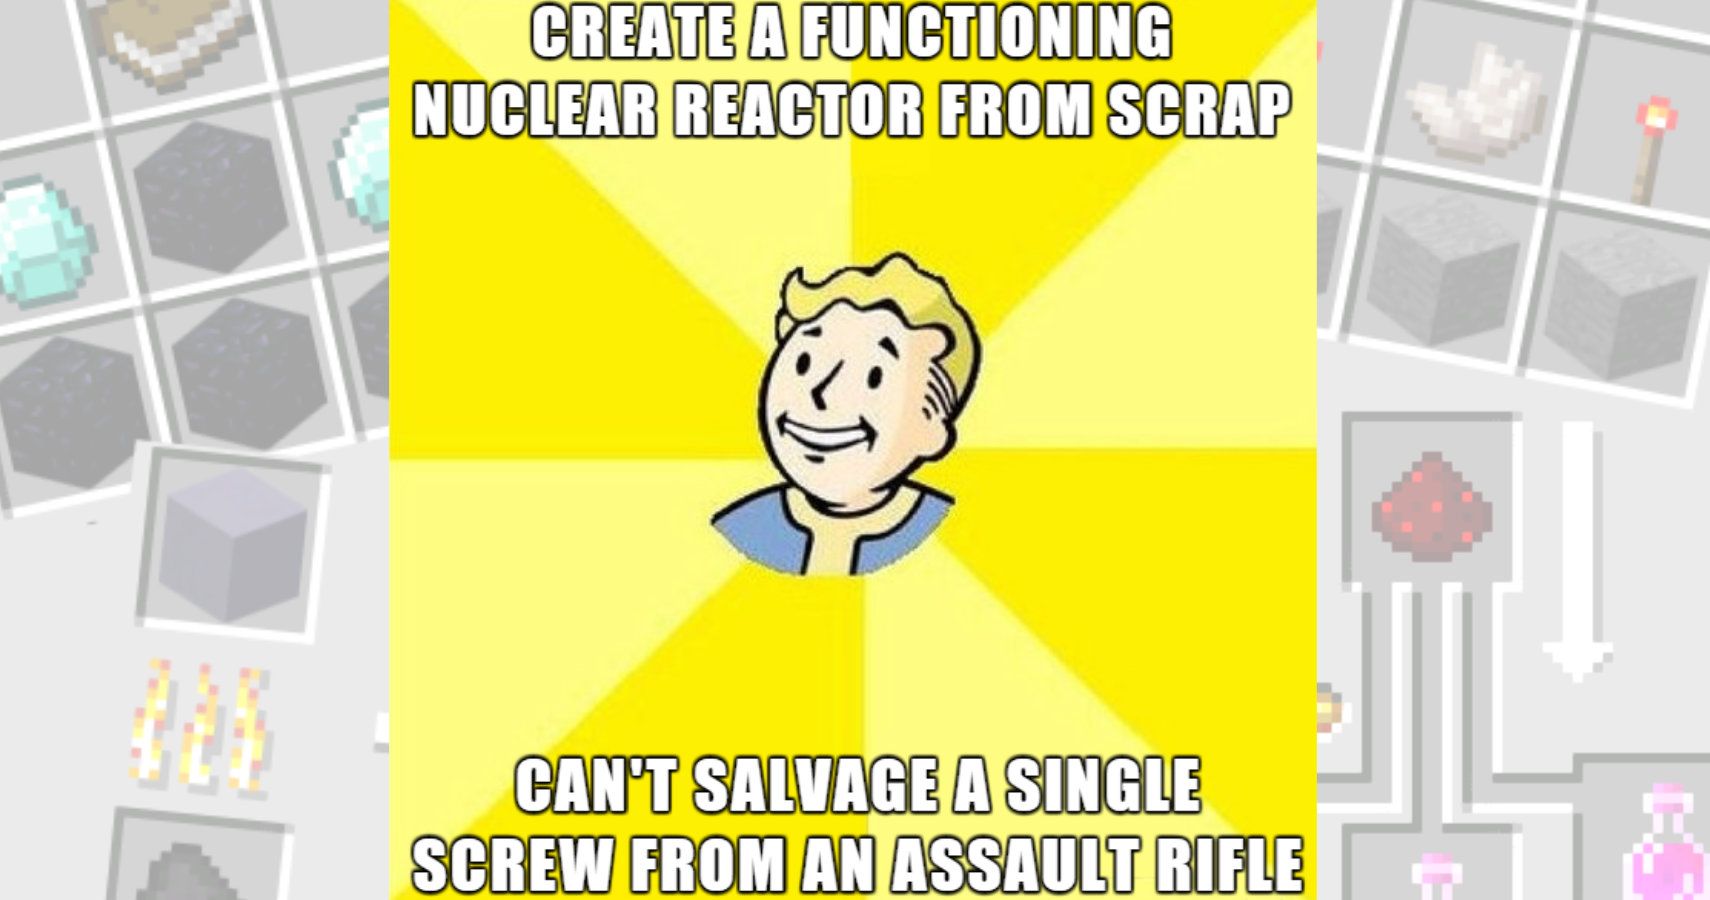 Fallout vault dweller in the middle. Text reads &quot;create a functioning nuclear reactor from scrap, can't salvage a single screw from an assault rifle.&quot;